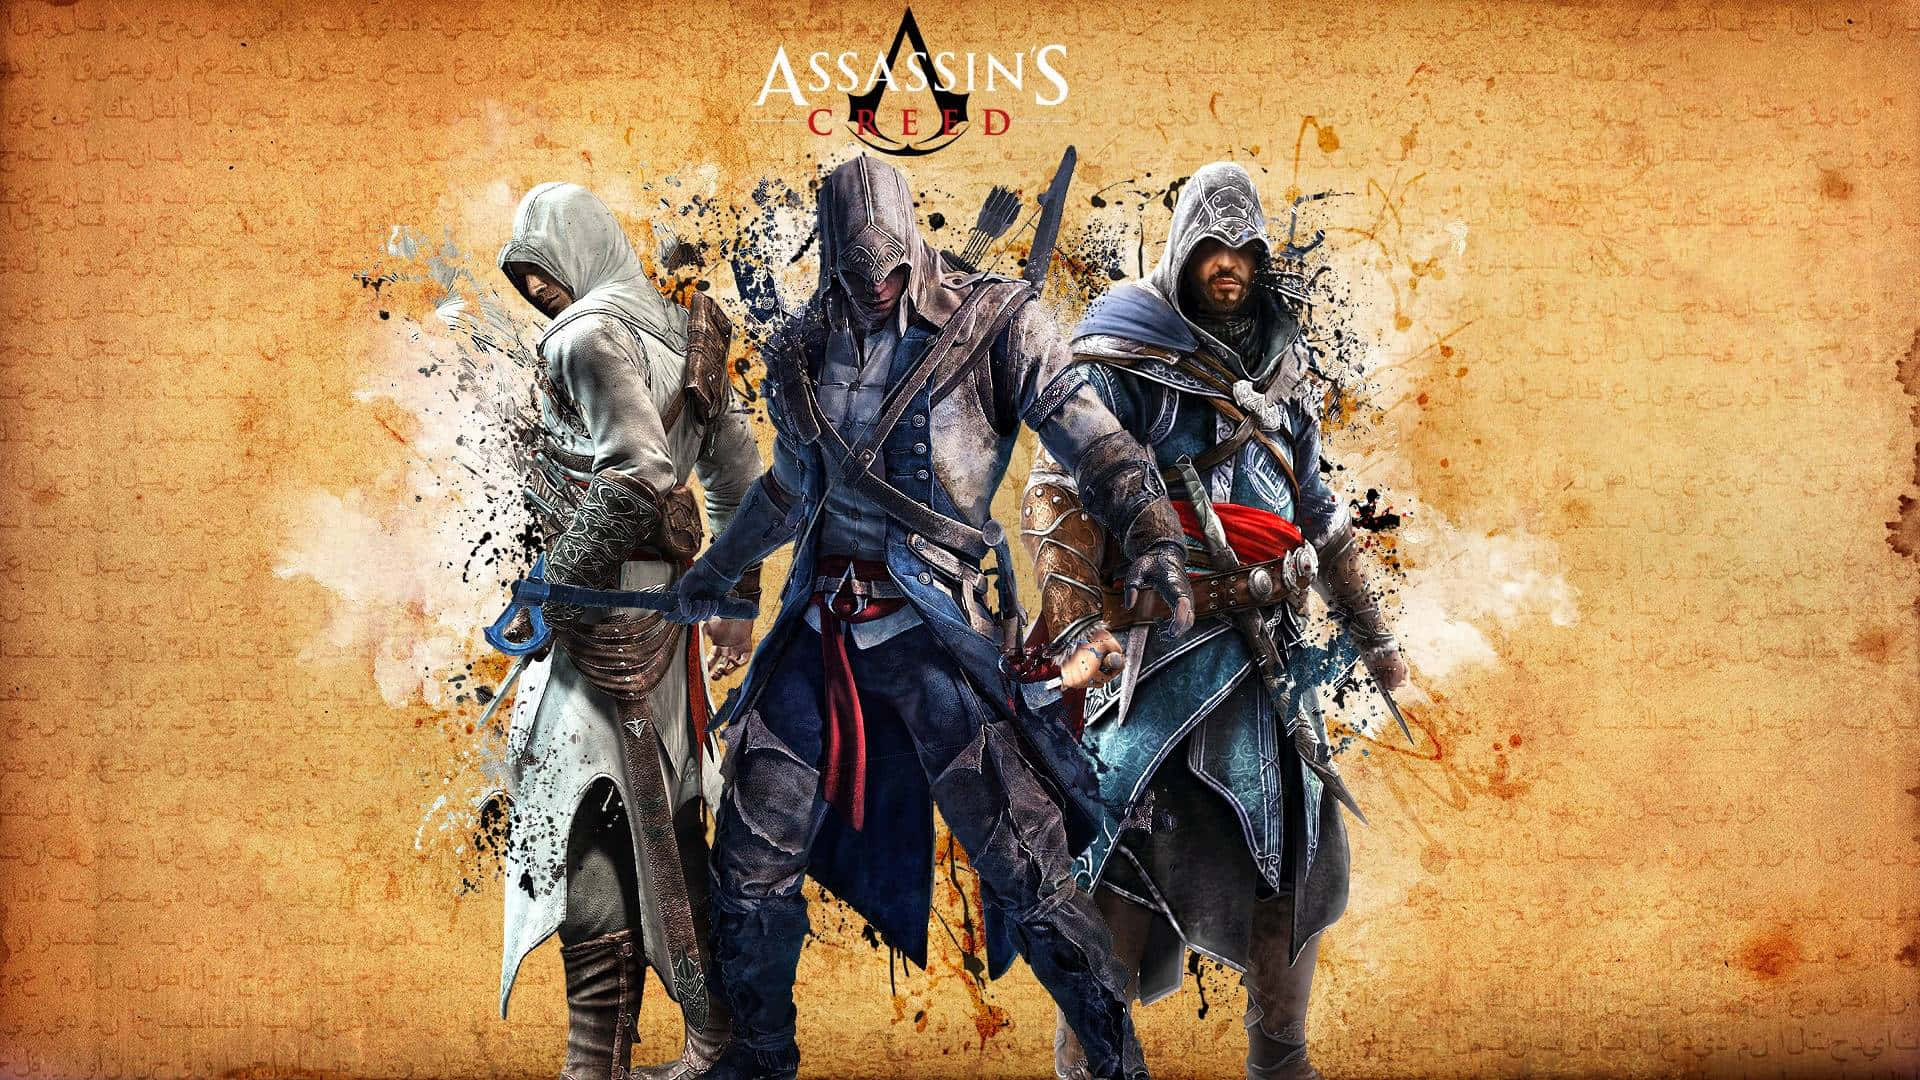 Hd Video Game Assassin's Creed